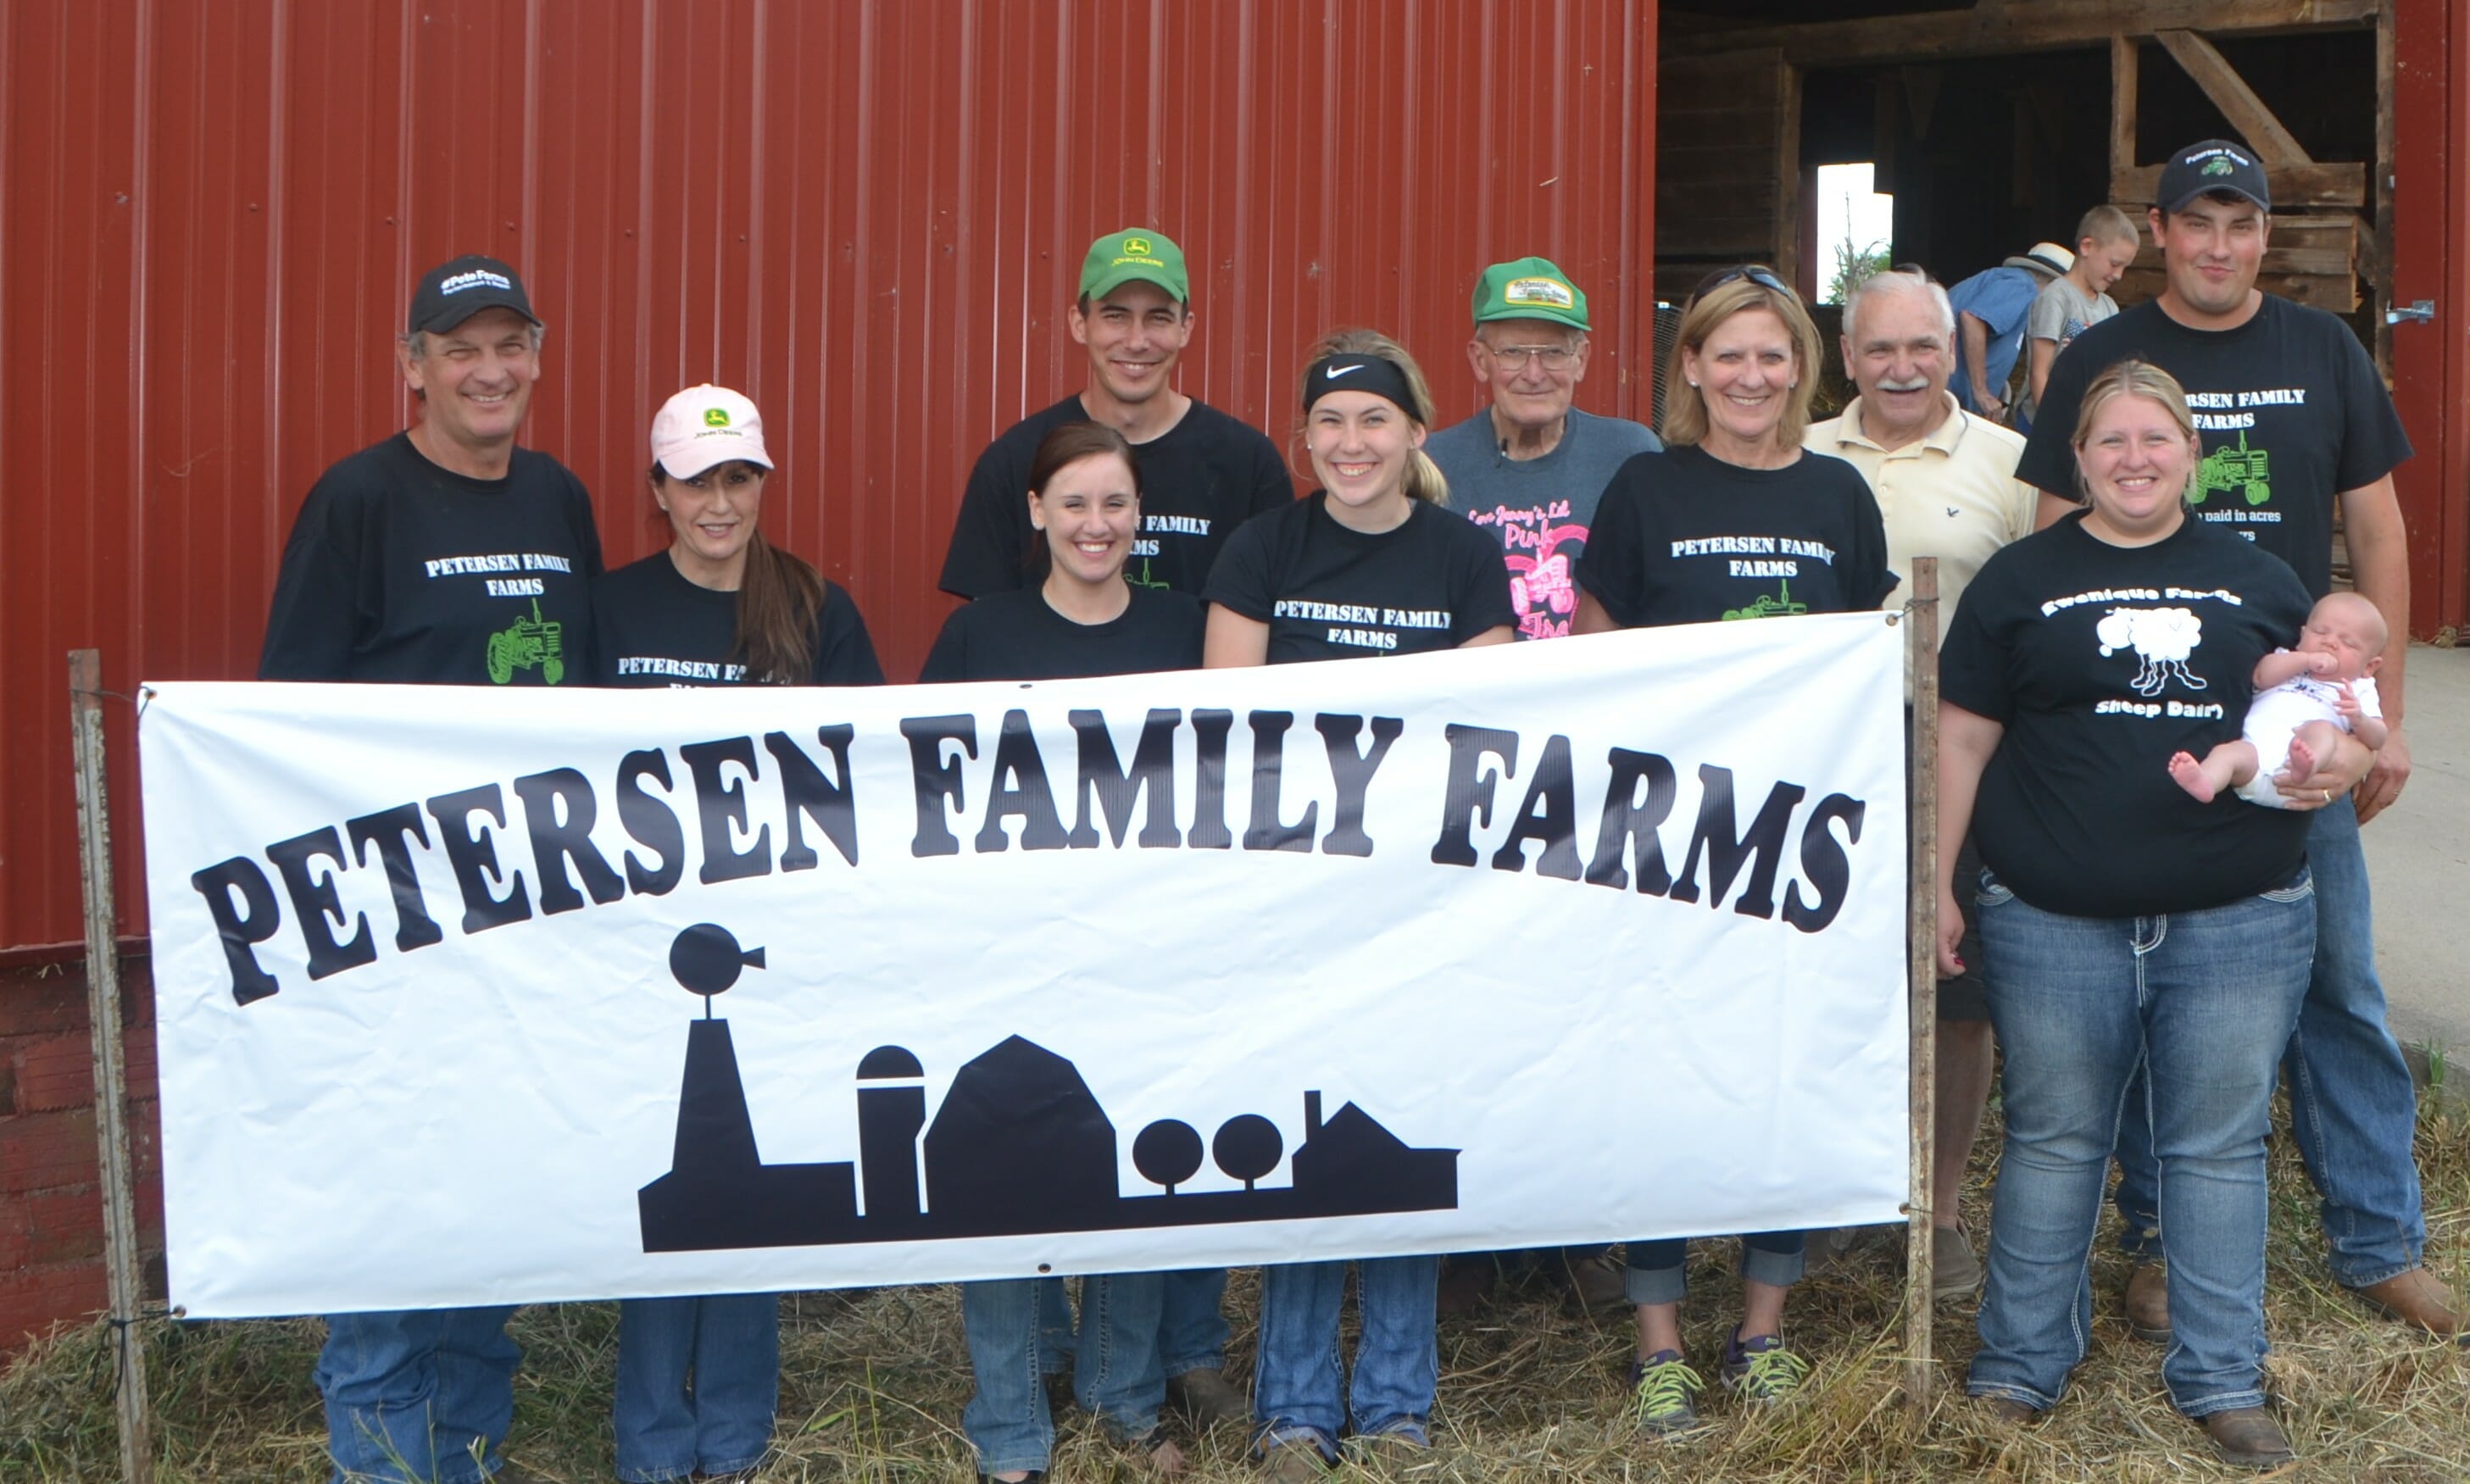 Petersen Family Farms is made up of multiple generations that accommodate several enterprises.